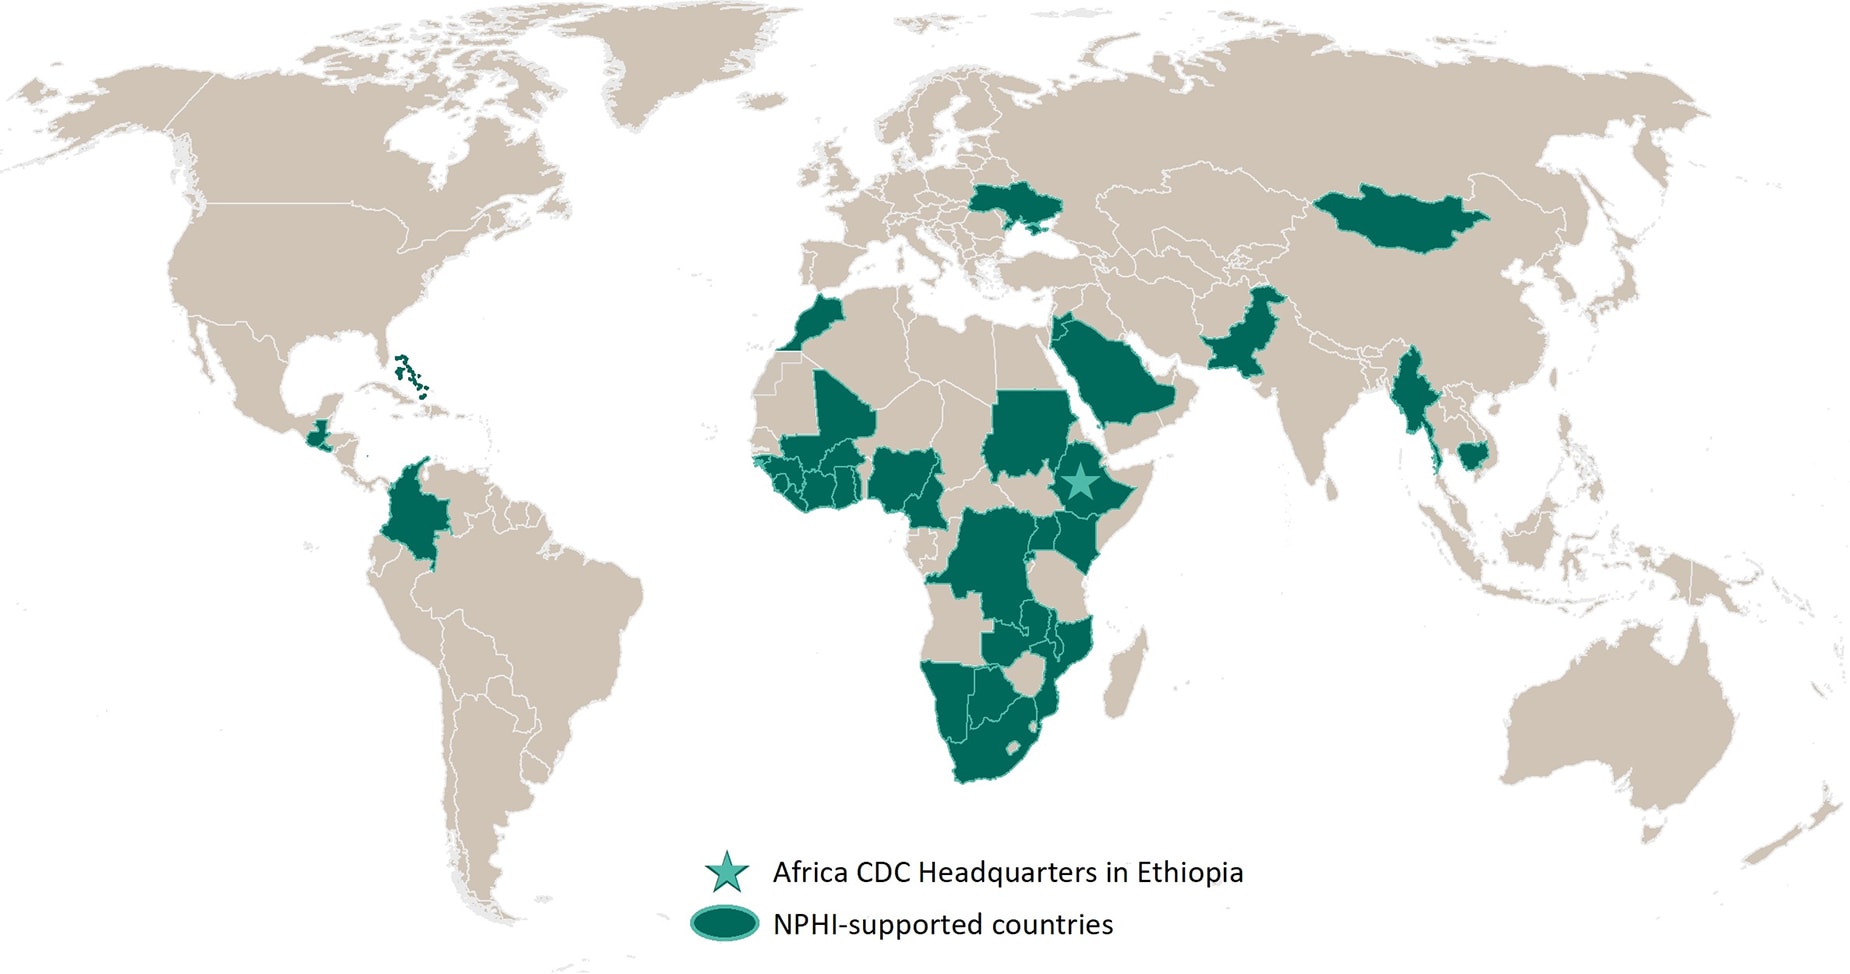 All countries the US CDC NPHI program has supported since 2011, effective May 1, 2020